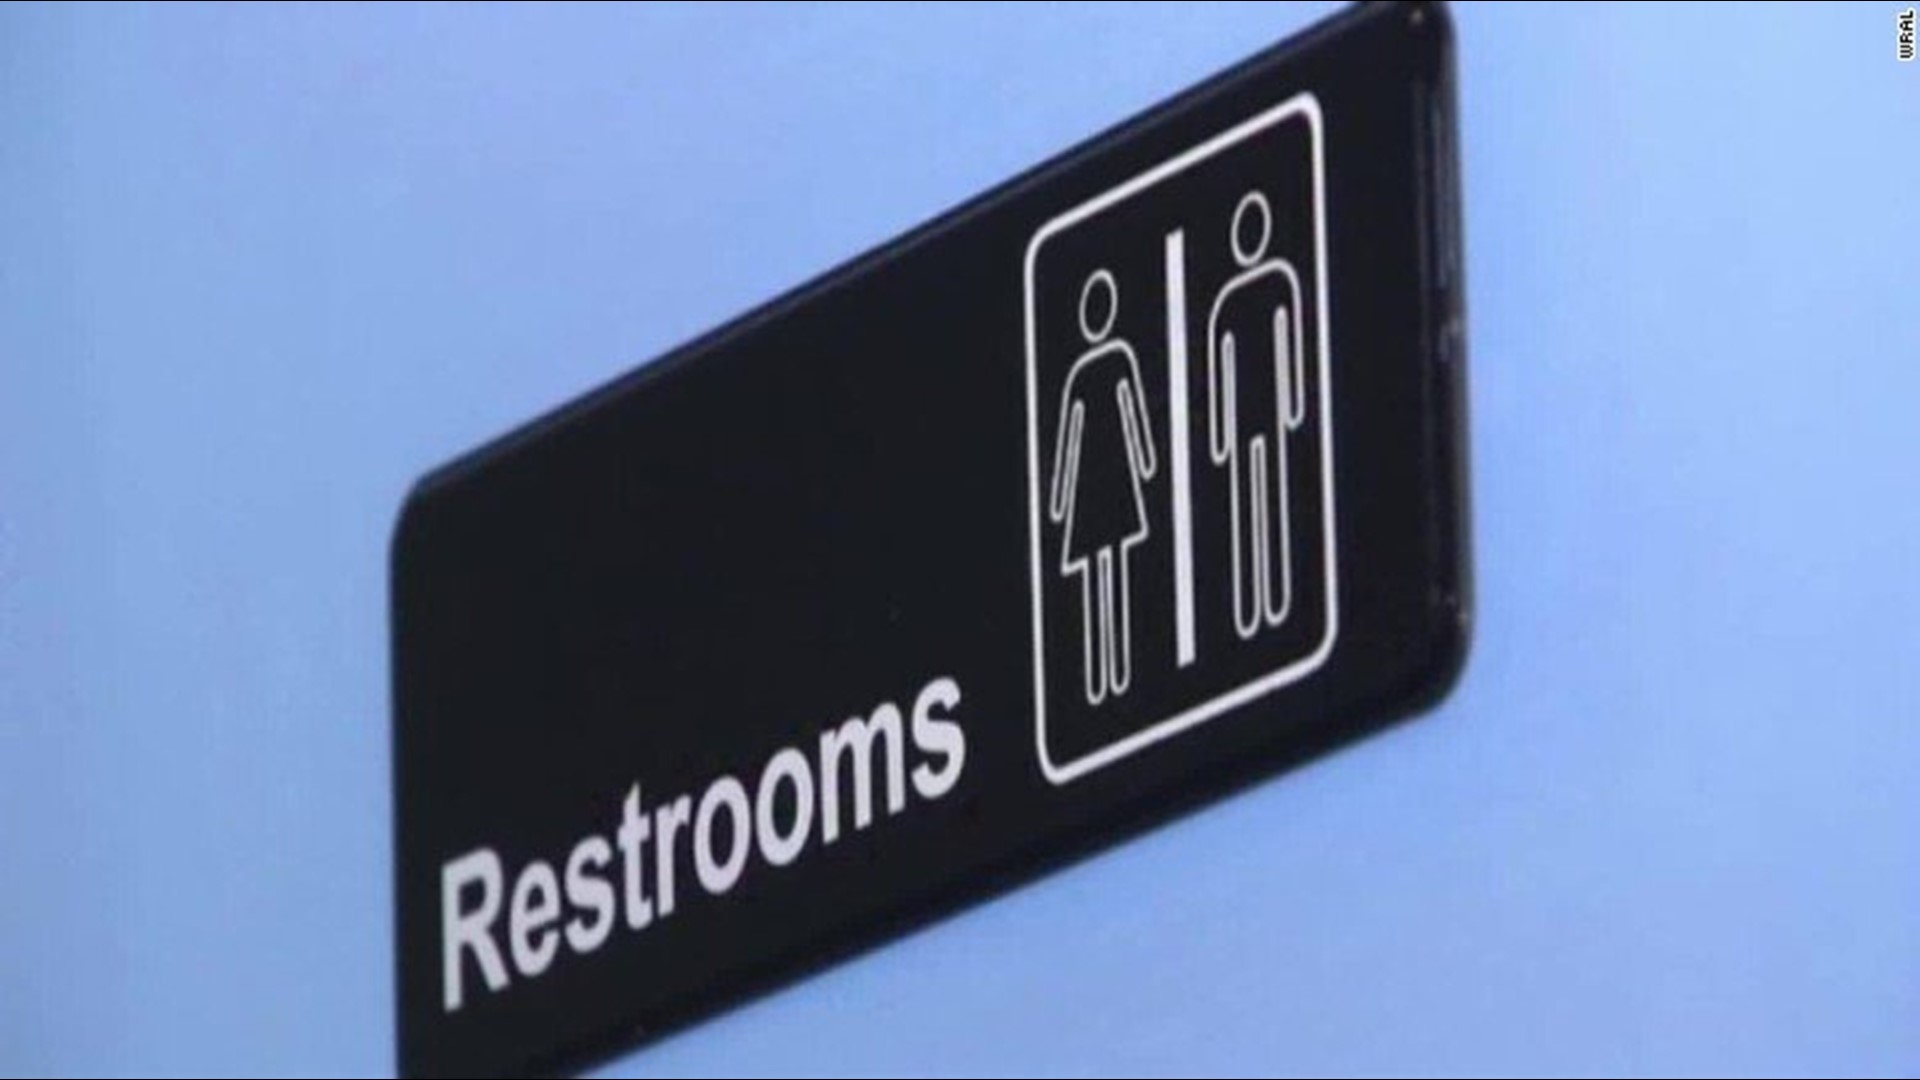 The law will prohibit transgender people at public schools from using the restroom that matches their gender identity.